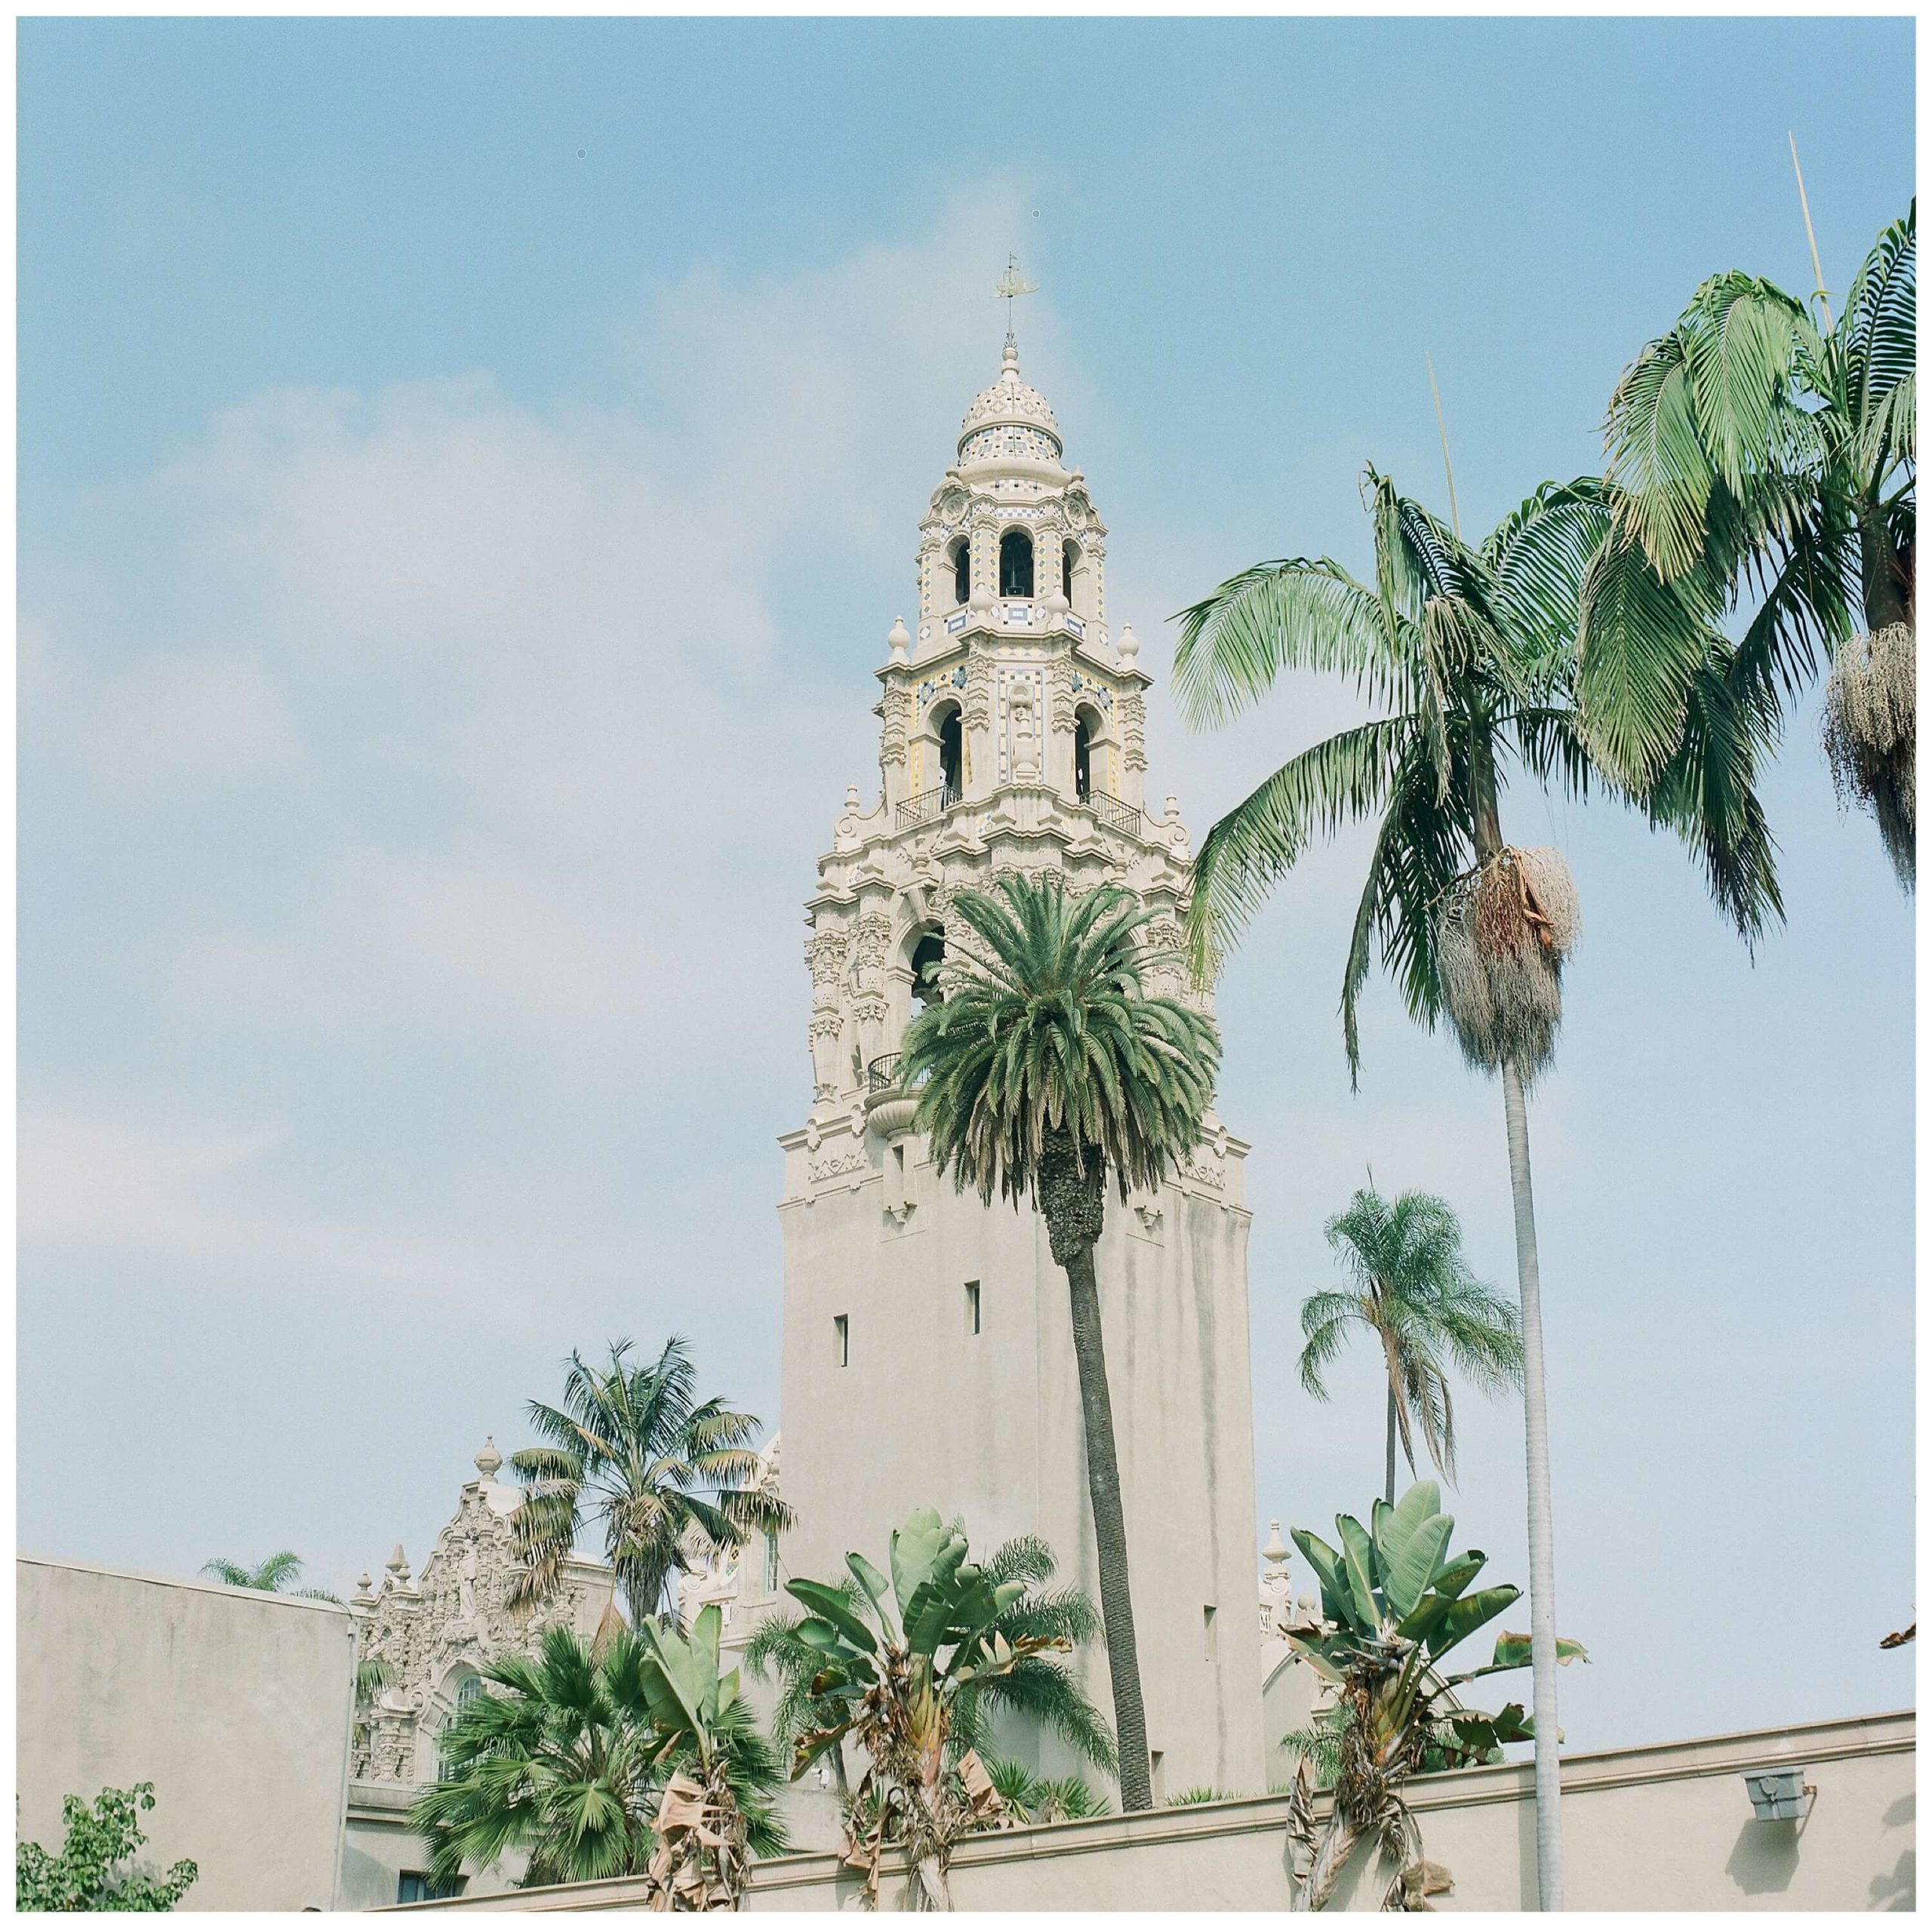 The California Tower, a mix of Plateresque, Baroque, Churrigueresque, and Rococo, Gothic, and Spanish-Colonial styles, rises against the bright blue sky with the palm trees on a sunny day at Balboa Park.